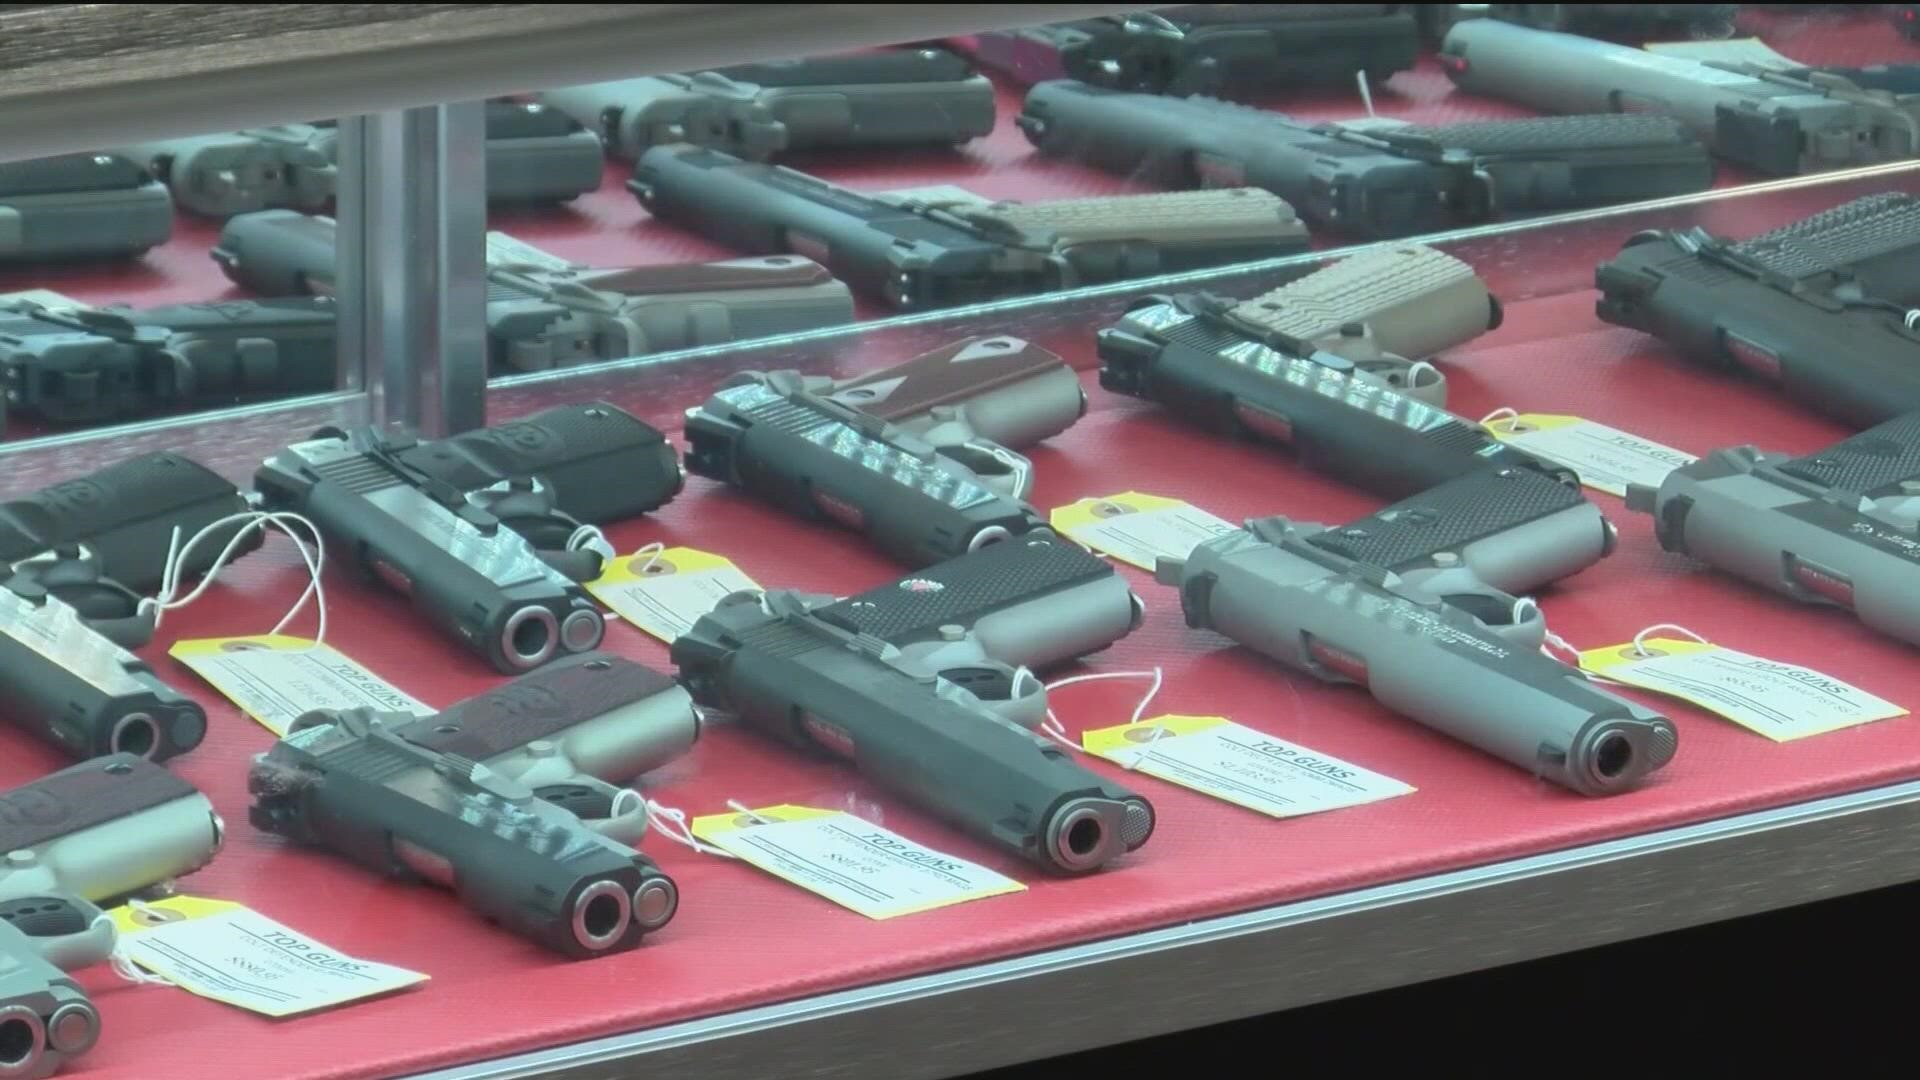 New proposal would allow San Diego County to sue gun manufacturers for mass shootings